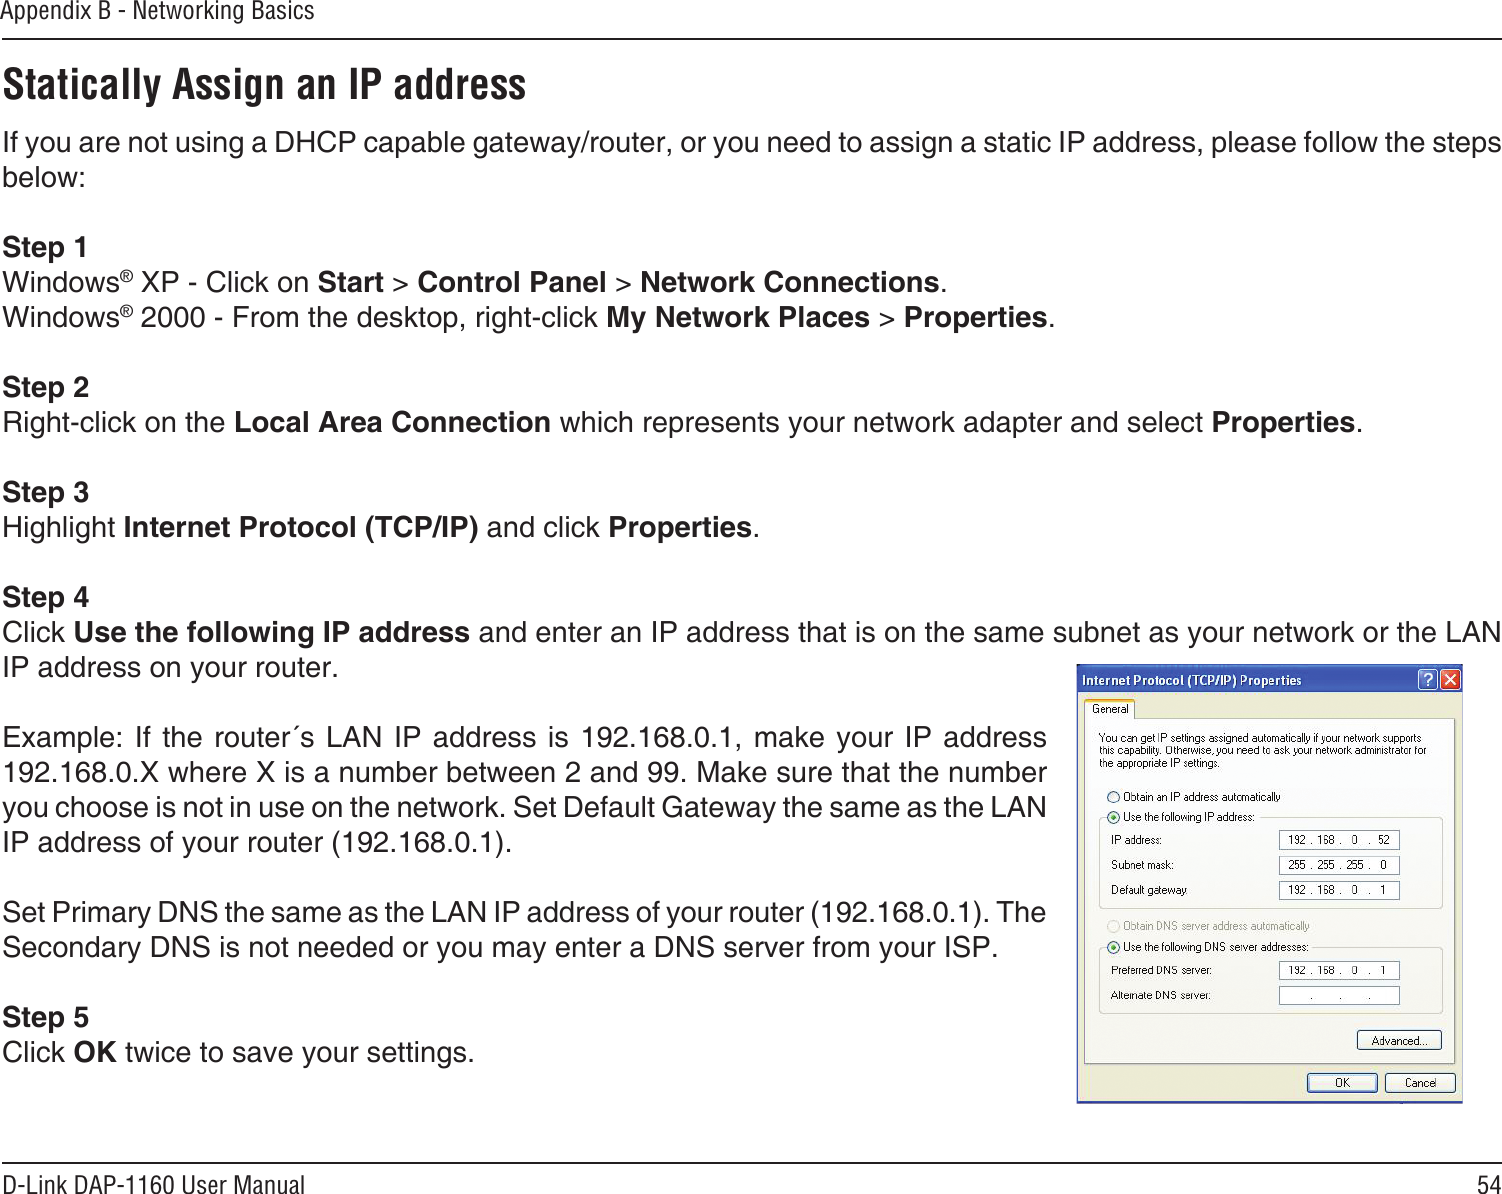 54D-Link DAP-1160 User ManualAppendix B - Networking BasicsStatically Assign an IP addressIf you are not using a DHCP capable gateway/router, or you need to assign a static IP address, please follow the steps below:Step 1Windows® XP - Click on Start &gt; Control Panel &gt; Network Connections.Windows® 2000 - From the desktop, right-click My Network Places &gt; Properties.Step 2Right-click on the Local Area Connection which represents your network adapter and select Properties.Step 3Highlight Internet Protocol (TCP/IP) and click Properties.Step 4Click Use the following IP address and enter an IP address that is on the same subnet as your network or the LAN IP address on your router. Example: If  the router´s  LAN IP  address is 192.168.0.1, make your  IP address 192.168.0.X where X is a number between 2 and 99. Make sure that the number you choose is not in use on the network. Set Default Gateway the same as the LAN IP address of your router (192.168.0.1). Set Primary DNS the same as the LAN IP address of your router (192.168.0.1). The Secondary DNS is not needed or you may enter a DNS server from your ISP.Step 5Click OK twice to save your settings.